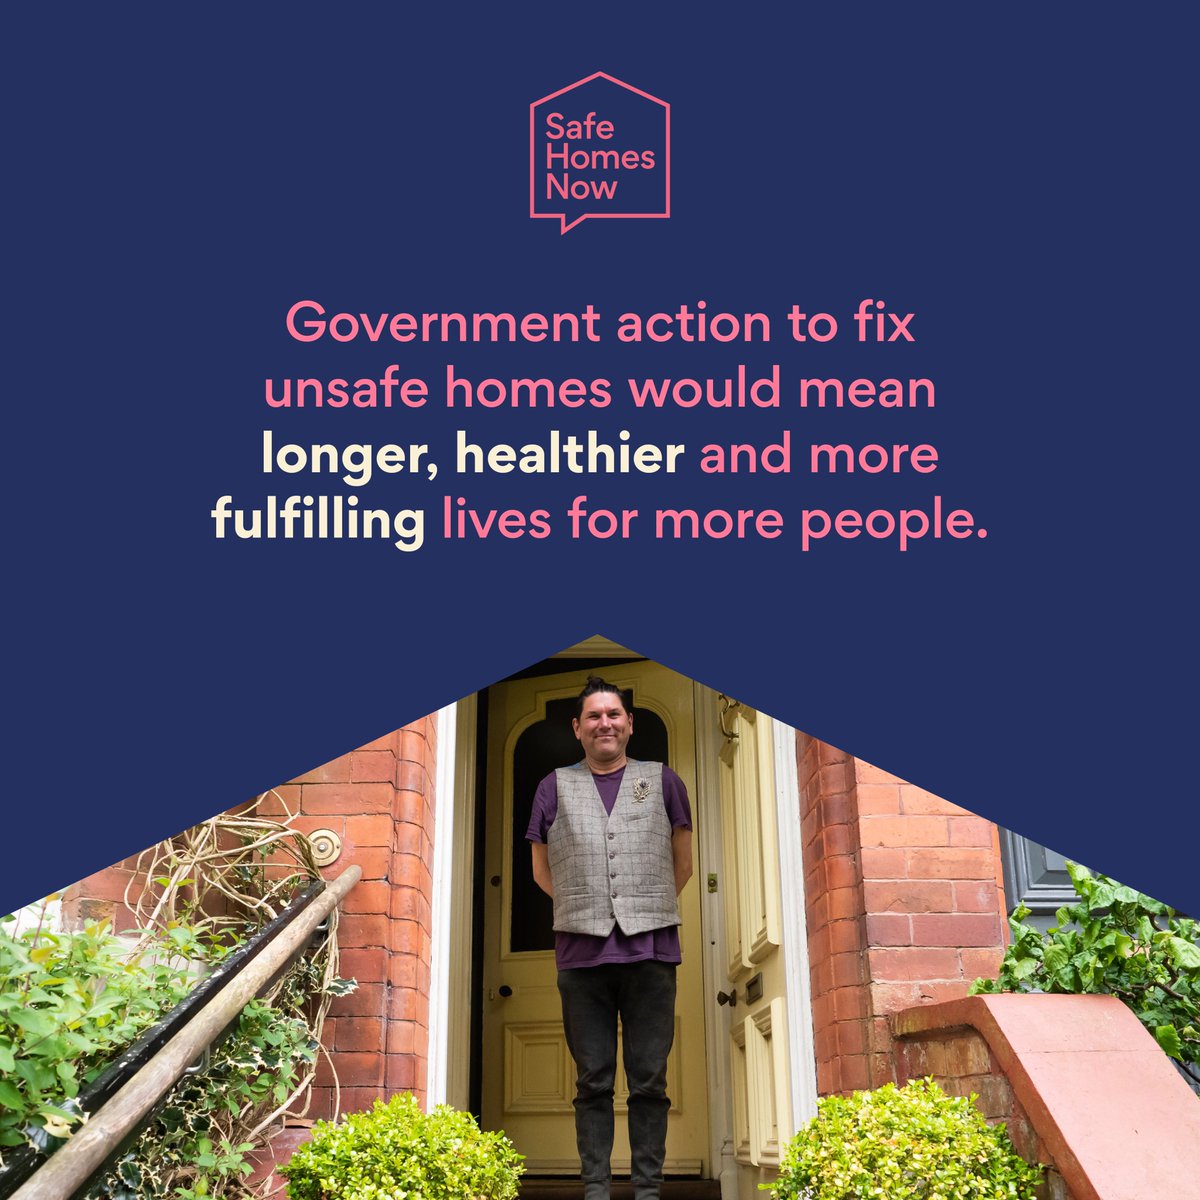 Nearly 8 million people in England are living in homes that are cold, need repair, or have serious hazards. I'm proud to support the #SafeHomesNow campaign. We need a national plan to fix unsafe homes and improve the lives of millions of people. @Ageing_Better